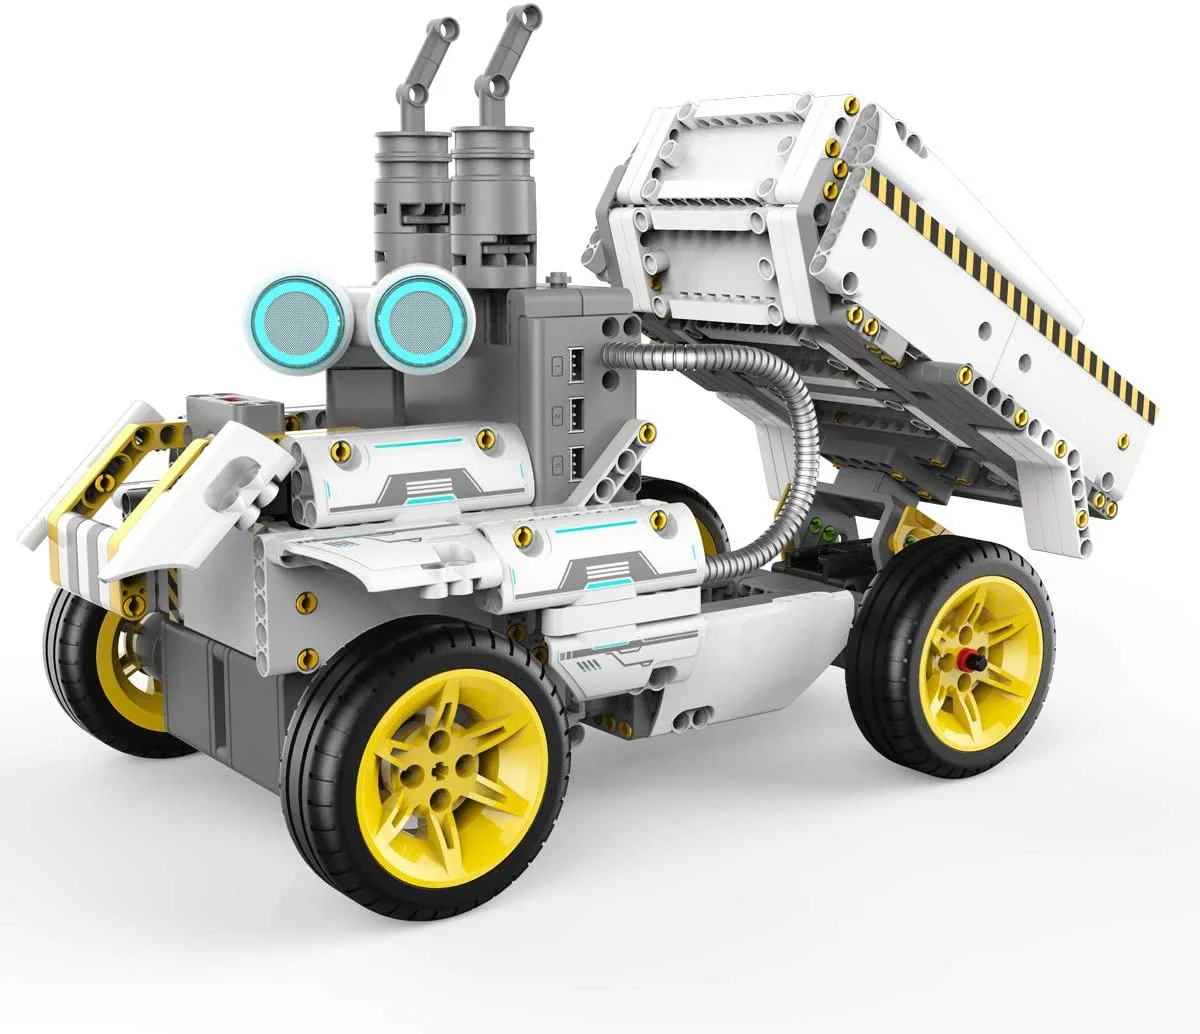 61Li4Mbjagl. Ac Sl1200 Rumble, Crush And Plow Into The New Ubtech Jimu Robot Builderbots Series: Truckbots Kit. With This Kit You Can Create Buildable, Codable Robots Like Dozerbot And Dirtbot Or Design Your Own Jimu Robot Creation. The Fun Is Extended With The Blockly Coding Platform, Allowing Kids Ages 8 And Up To Build And Code These Robots To Perform Countless Programs And Tricks. Download The Free Jimu App That Has Step By Step, 3D, 360° Building Instructions. Ages: 8+ Years. Includes: &Lt;Ul&Gt; &Lt;Li&Gt;410 Snap-Together Parts&Lt;/Li&Gt; &Lt;Li&Gt;2 Smooth Motion Robotic Servo Motors&Lt;/Li&Gt; &Lt;Li&Gt;2 Dc Motors&Lt;/Li&Gt; &Lt;Li&Gt;1 Ultrasonic Sensor &Amp; Rgb Light&Lt;/Li&Gt; &Lt;Li&Gt;1 Main Control Box&Lt;/Li&Gt; &Lt;Li&Gt;Usb Cable And Quick Start Guide Included&Lt;/Li&Gt; &Lt;/Ul&Gt; Requires: &Lt;Ul&Gt; &Lt;Li&Gt;A Compatible Ios Or Android Device Is Required (Sold Separately).&Lt;/Li&Gt; &Lt;/Ul&Gt; Build.code.create: &Lt;Ul&Gt; &Lt;Li&Gt;Construct Dozerbot, Dirtbot Or Design Your Own Jimu Robot Creation&Lt;/Li&Gt; &Lt;Li&Gt;Learn To Use Blockly Coding To Program Your Robot To Navigate Obstacles, Carry Objects, Create Color Effects And More&Lt;/Li&Gt; &Lt;Li&Gt;Create Entirely New, Custom Actions With The Prp (Pose, Record, Play) Function&Lt;/Li&Gt; &Lt;Li&Gt;No Tools Required – Our 3D, 360° Animated Instruction In The Free Jimu App Walk Users Through The Steps&Lt;/Li&Gt; &Lt;Li&Gt;Great For Ages 8 And Up&Lt;/Li&Gt; &Lt;/Ul&Gt; Ubtech Jimu Truckbots Kit Stem Edition Jra0102 Ubtech Jimu Truckbots Kit Stem Edition Jra0102